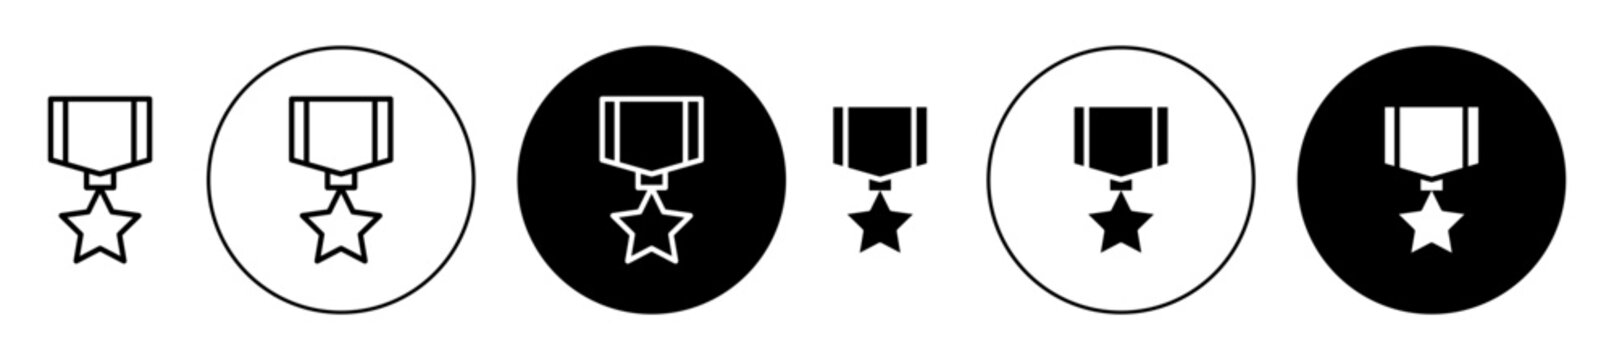 Military medal Icon vector icon set in black color. Suitable for apps and website UI designs